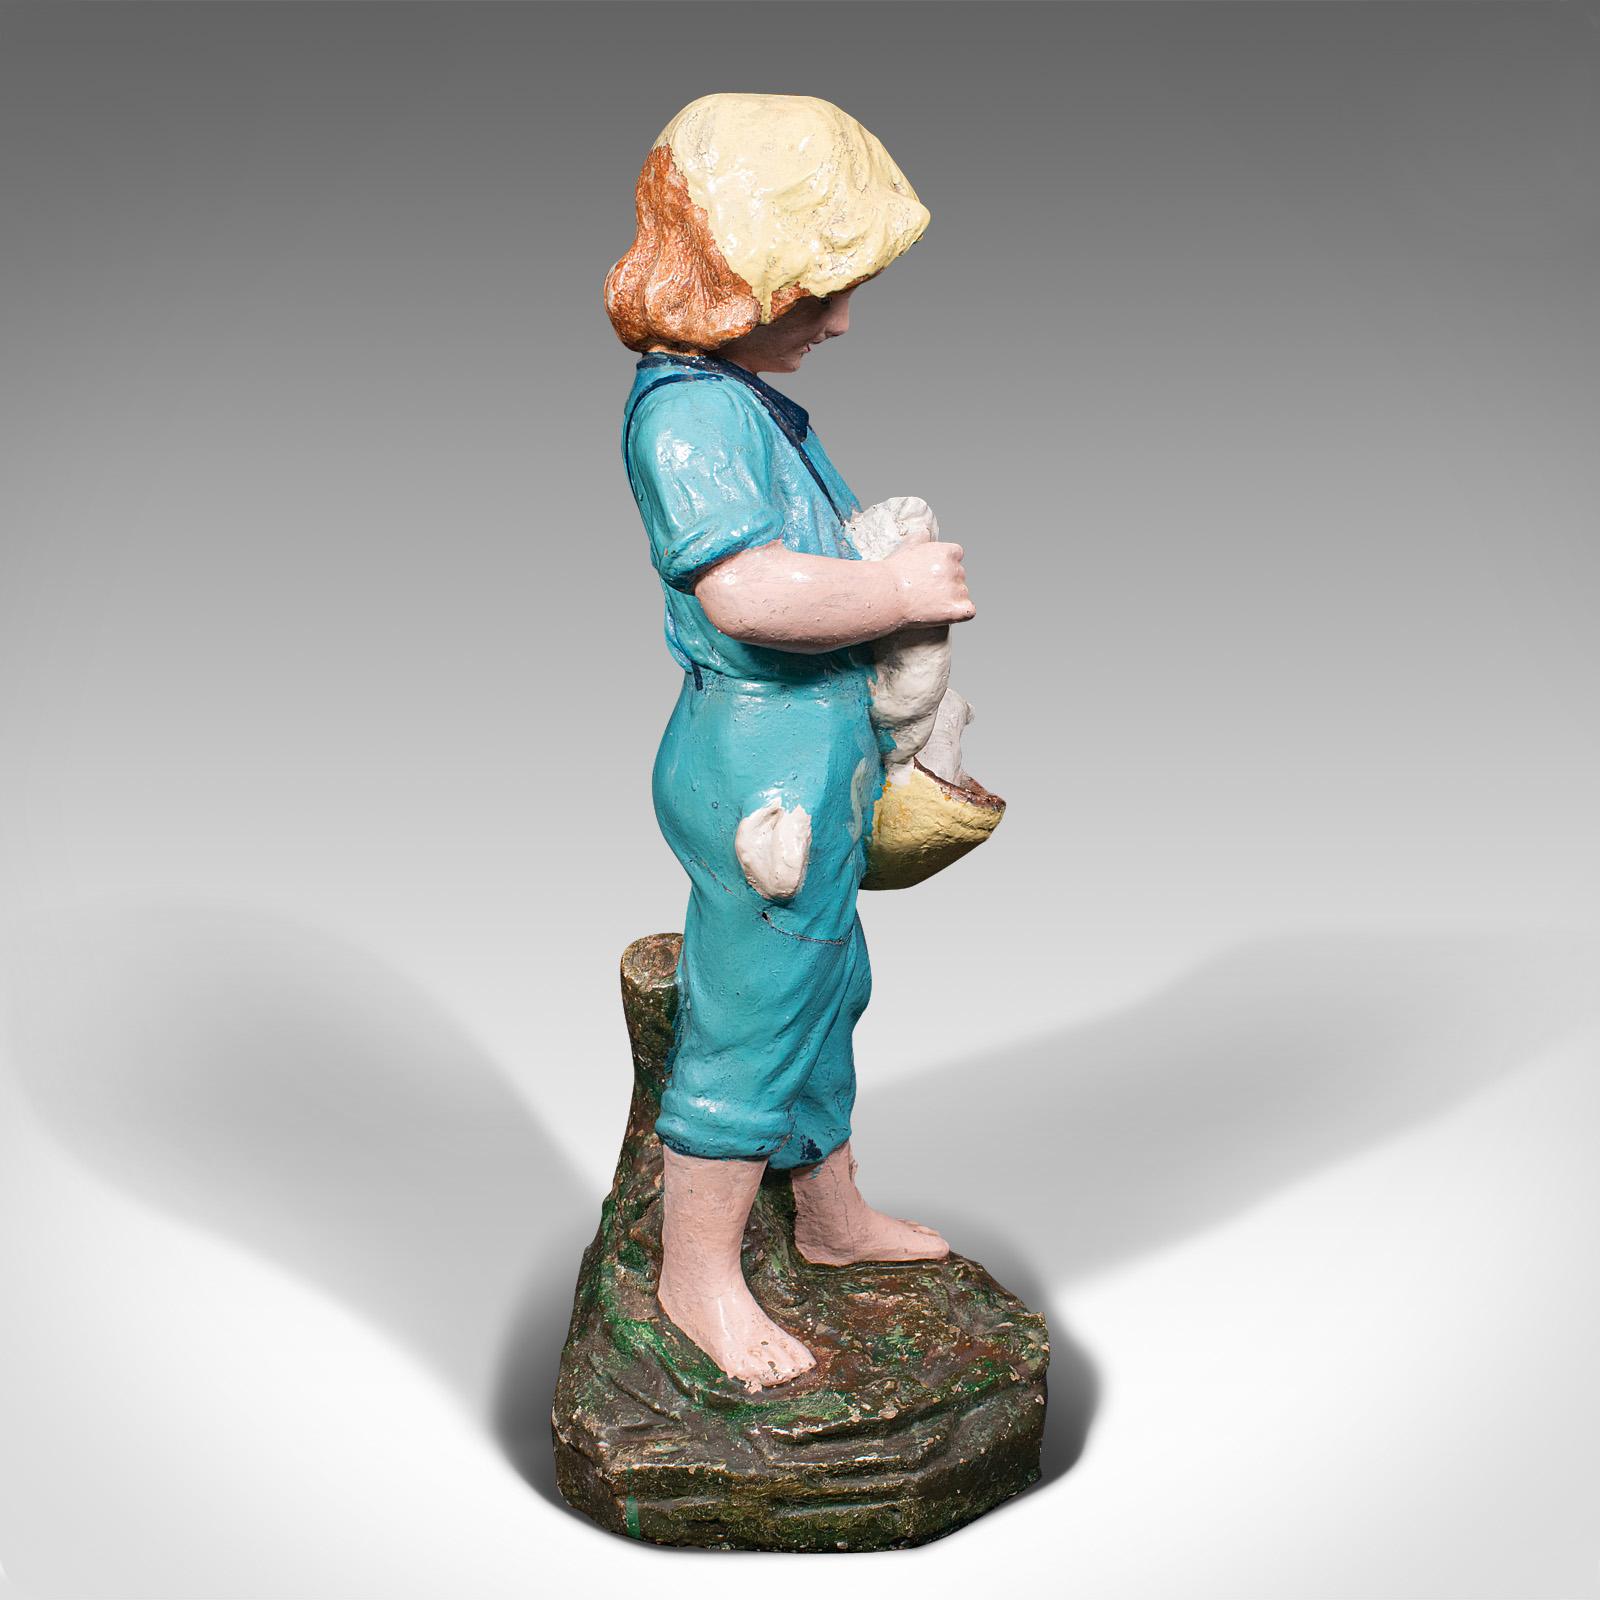 Antique Farm Girl Figure, French, Decorative Statue, Provincial, Late Victorian In Good Condition For Sale In Hele, Devon, GB